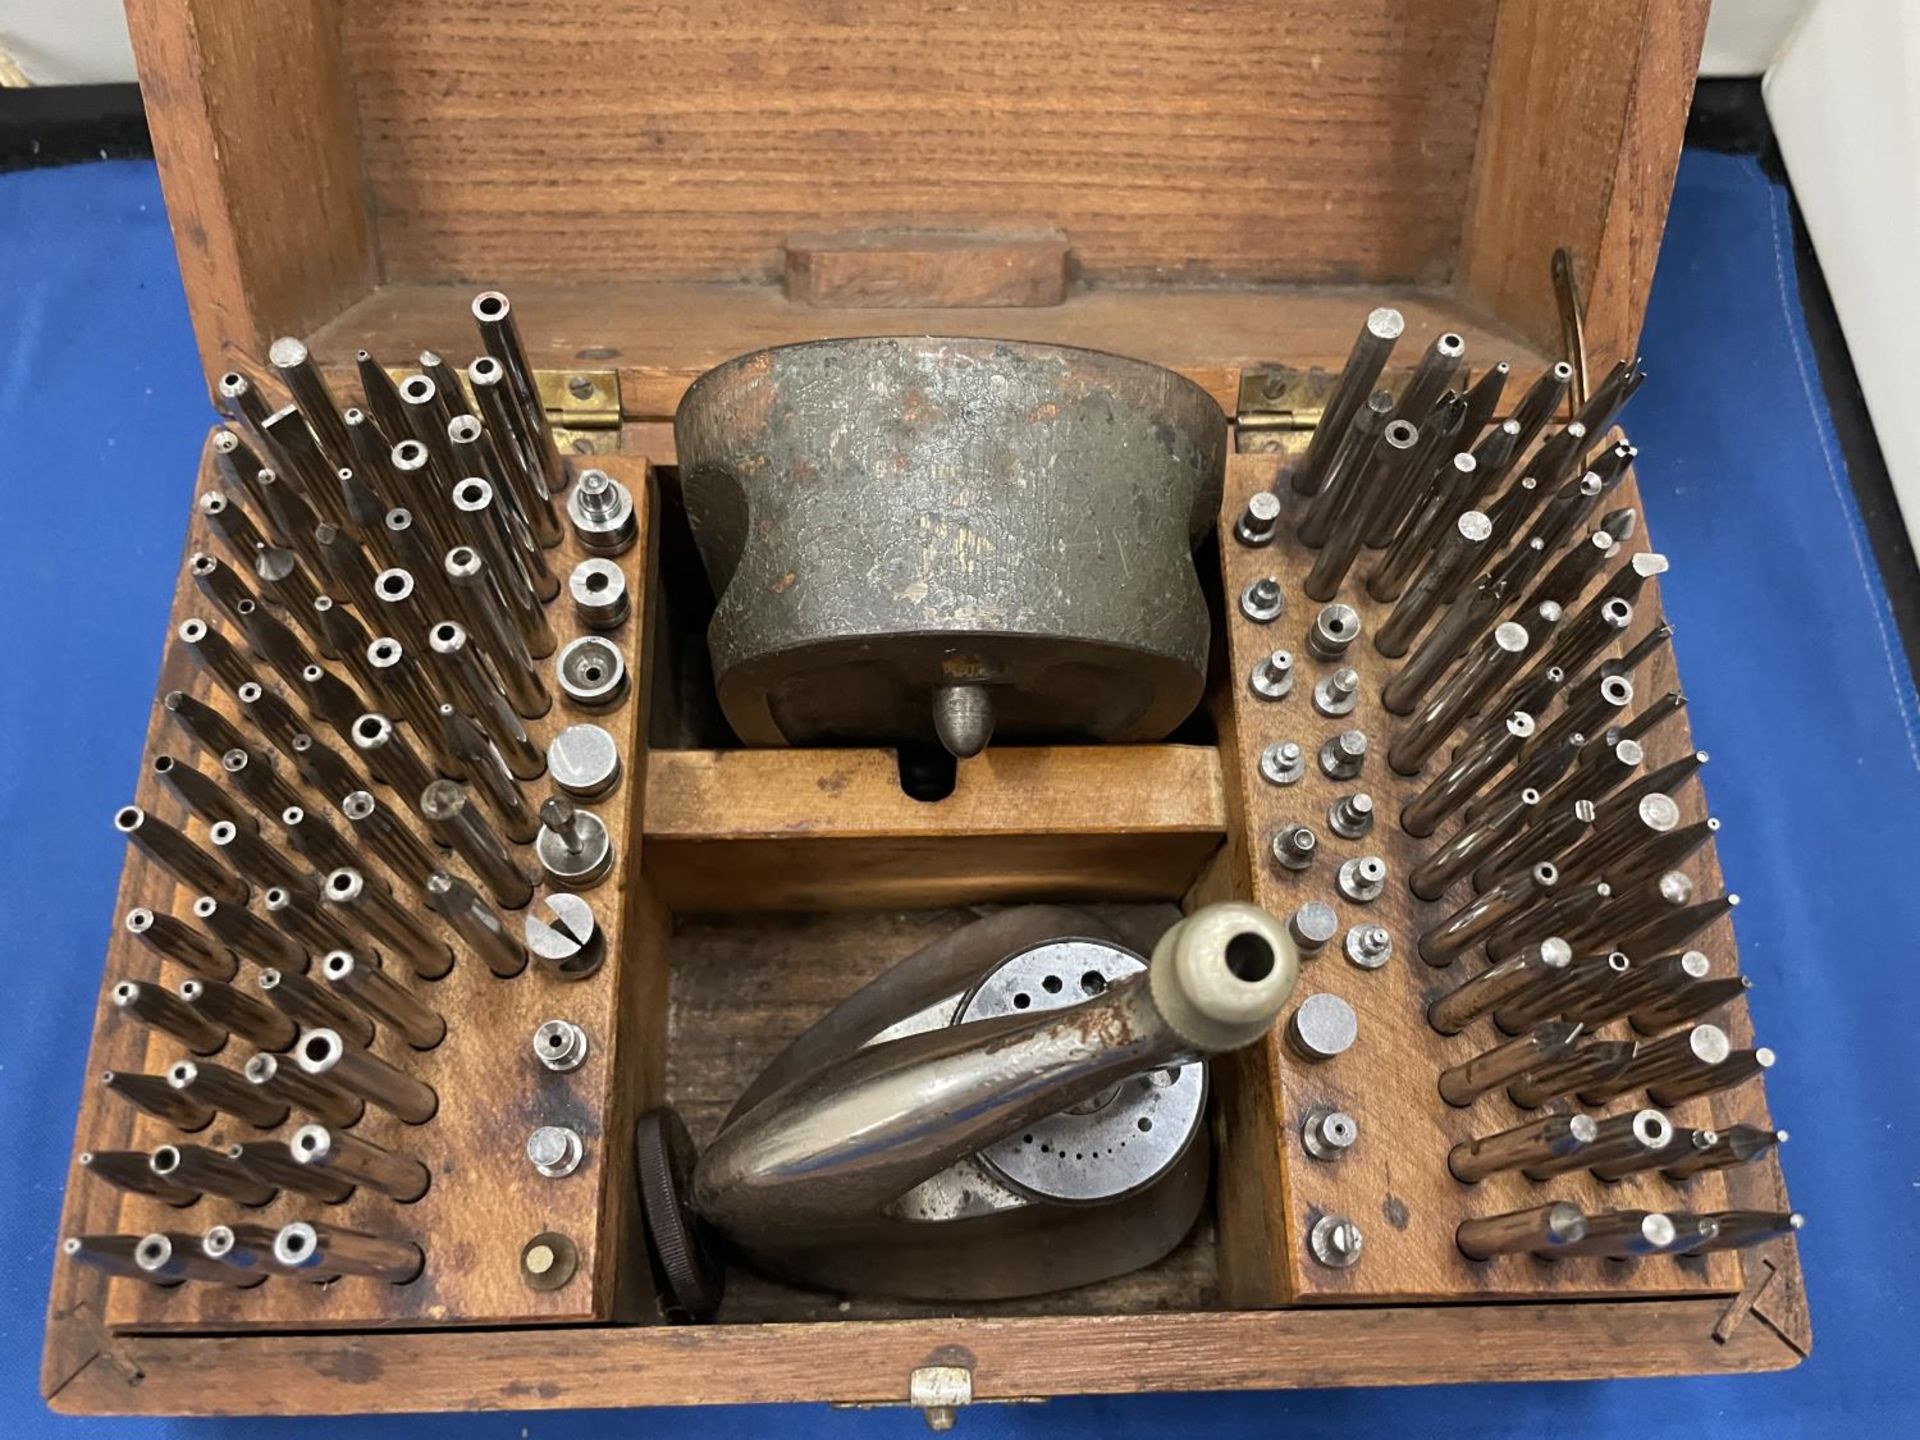 A BOLEY WATCHMAKERS RIVETING AND STAKING TOOLS (COMPLETE SET) IN ORIGINAL WOODEN BOX - Image 7 of 14